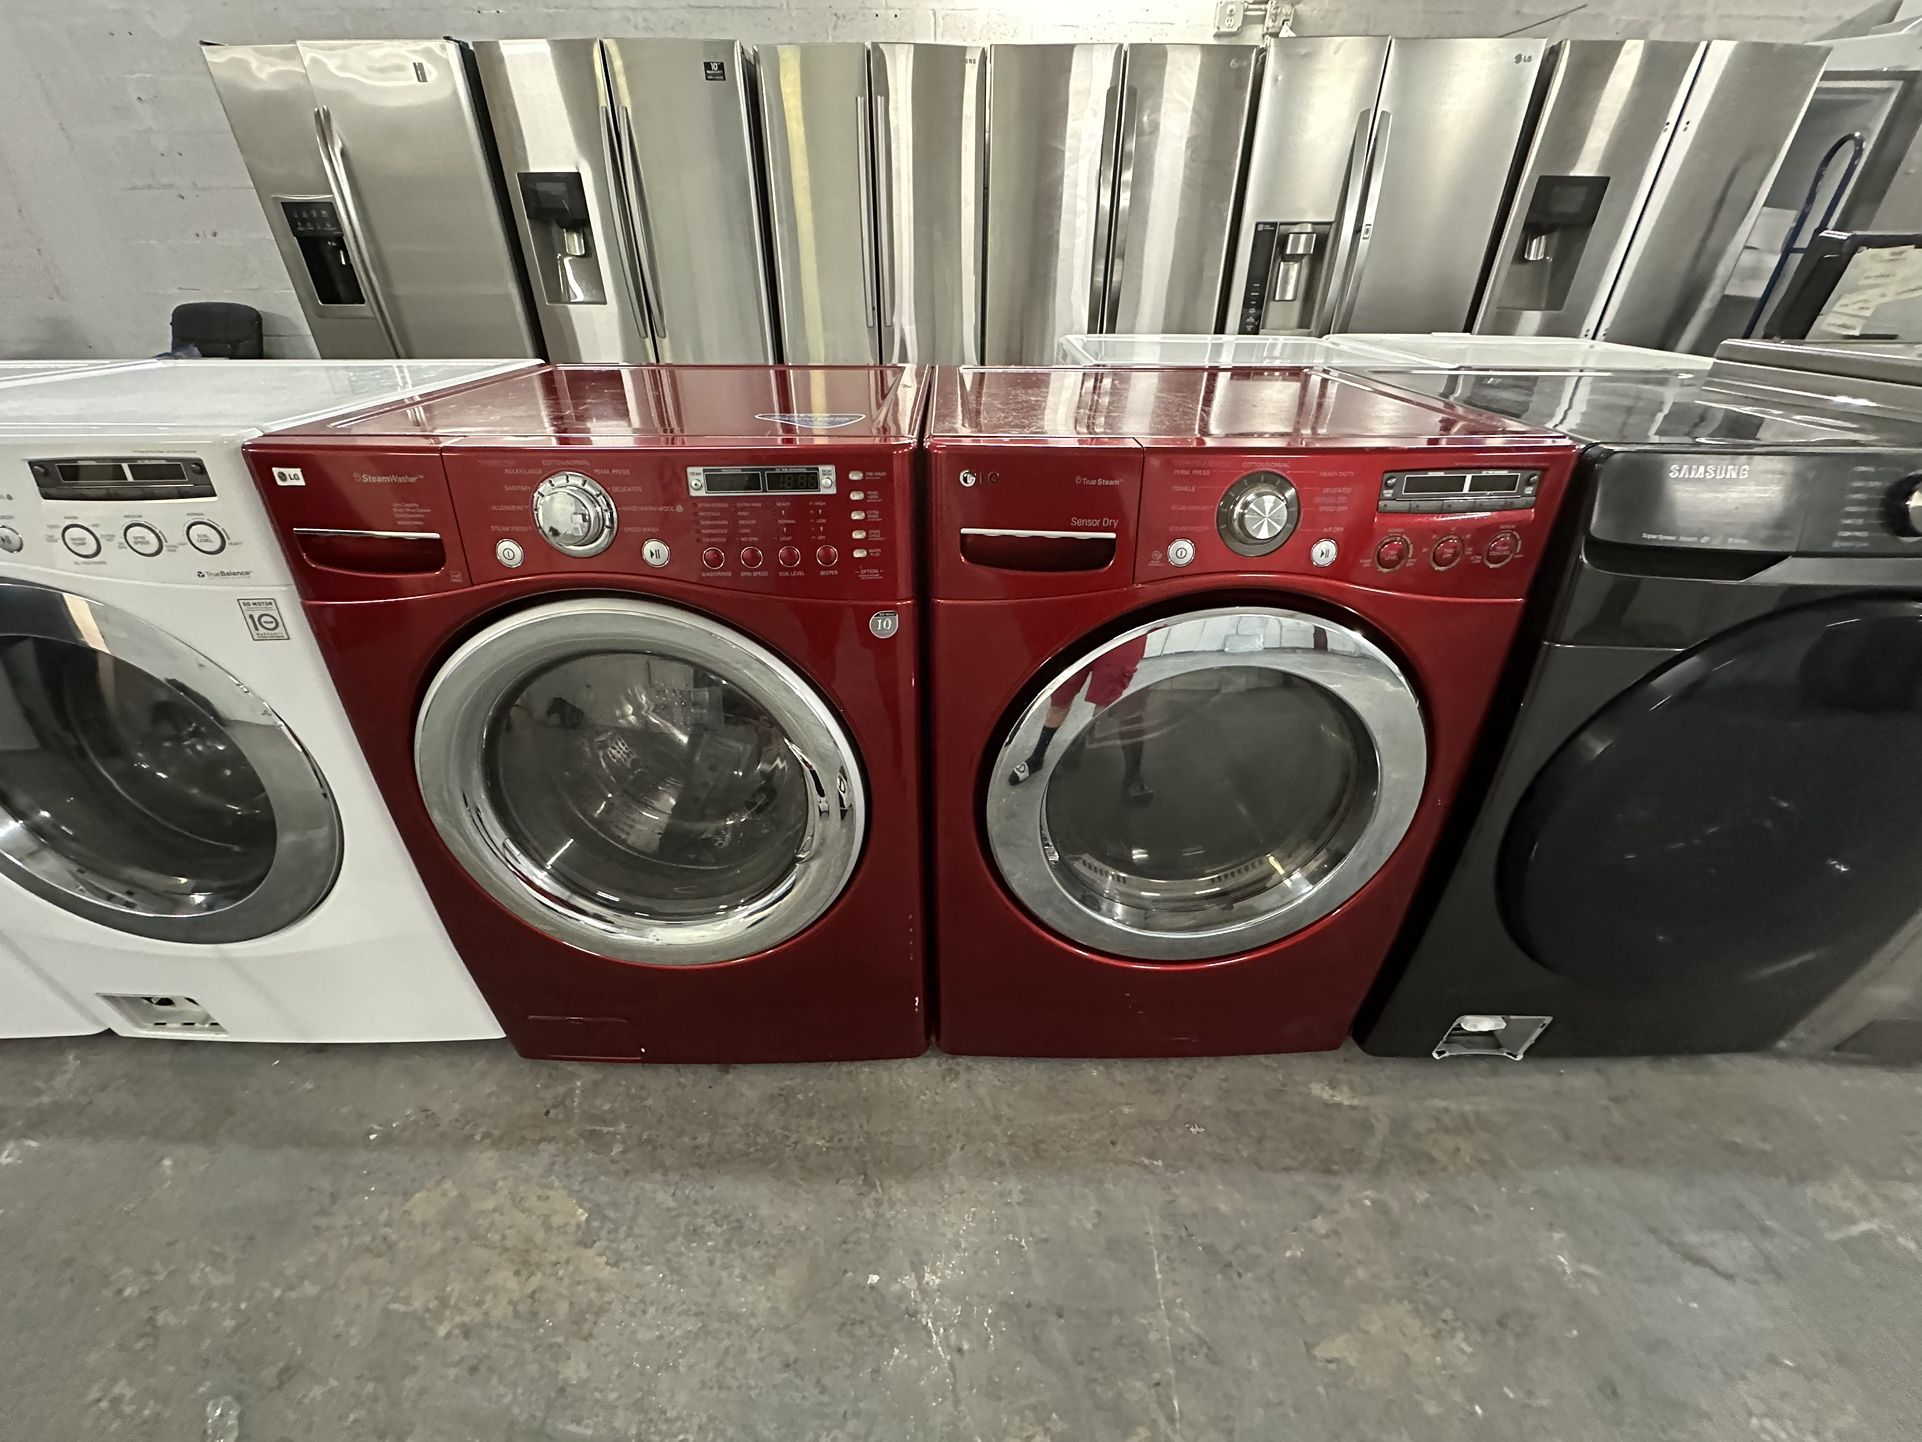 Lg Washer And Dryer Set